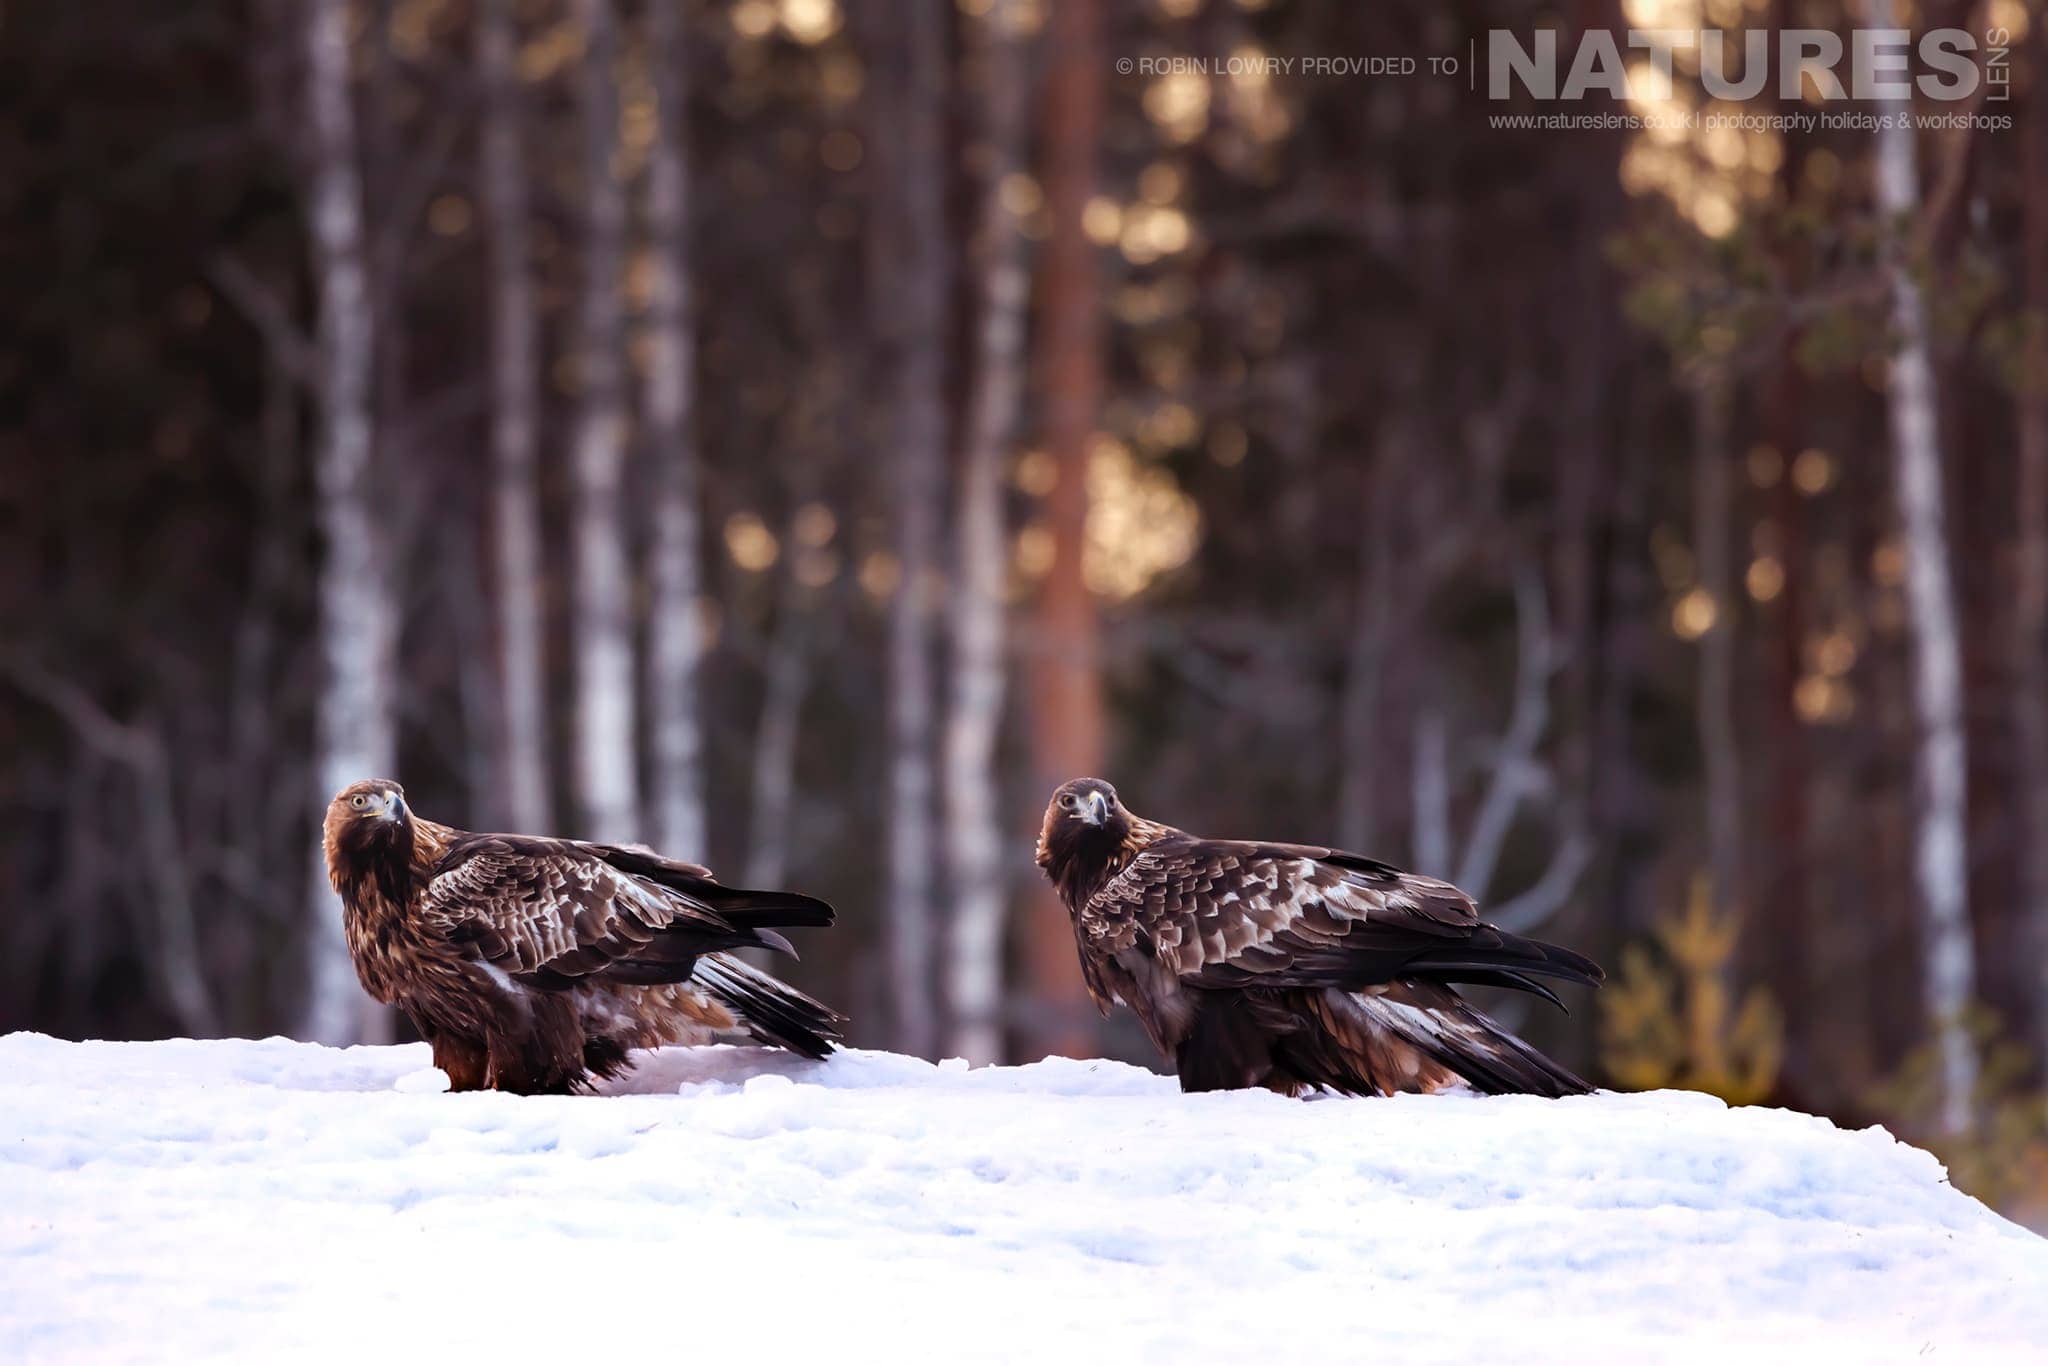 The Pair Of Golden Eagles On Snowy Ground Photographed During A Natureslens Photography Holiday To Photograph Northern Sweden'S Eagles In Winter